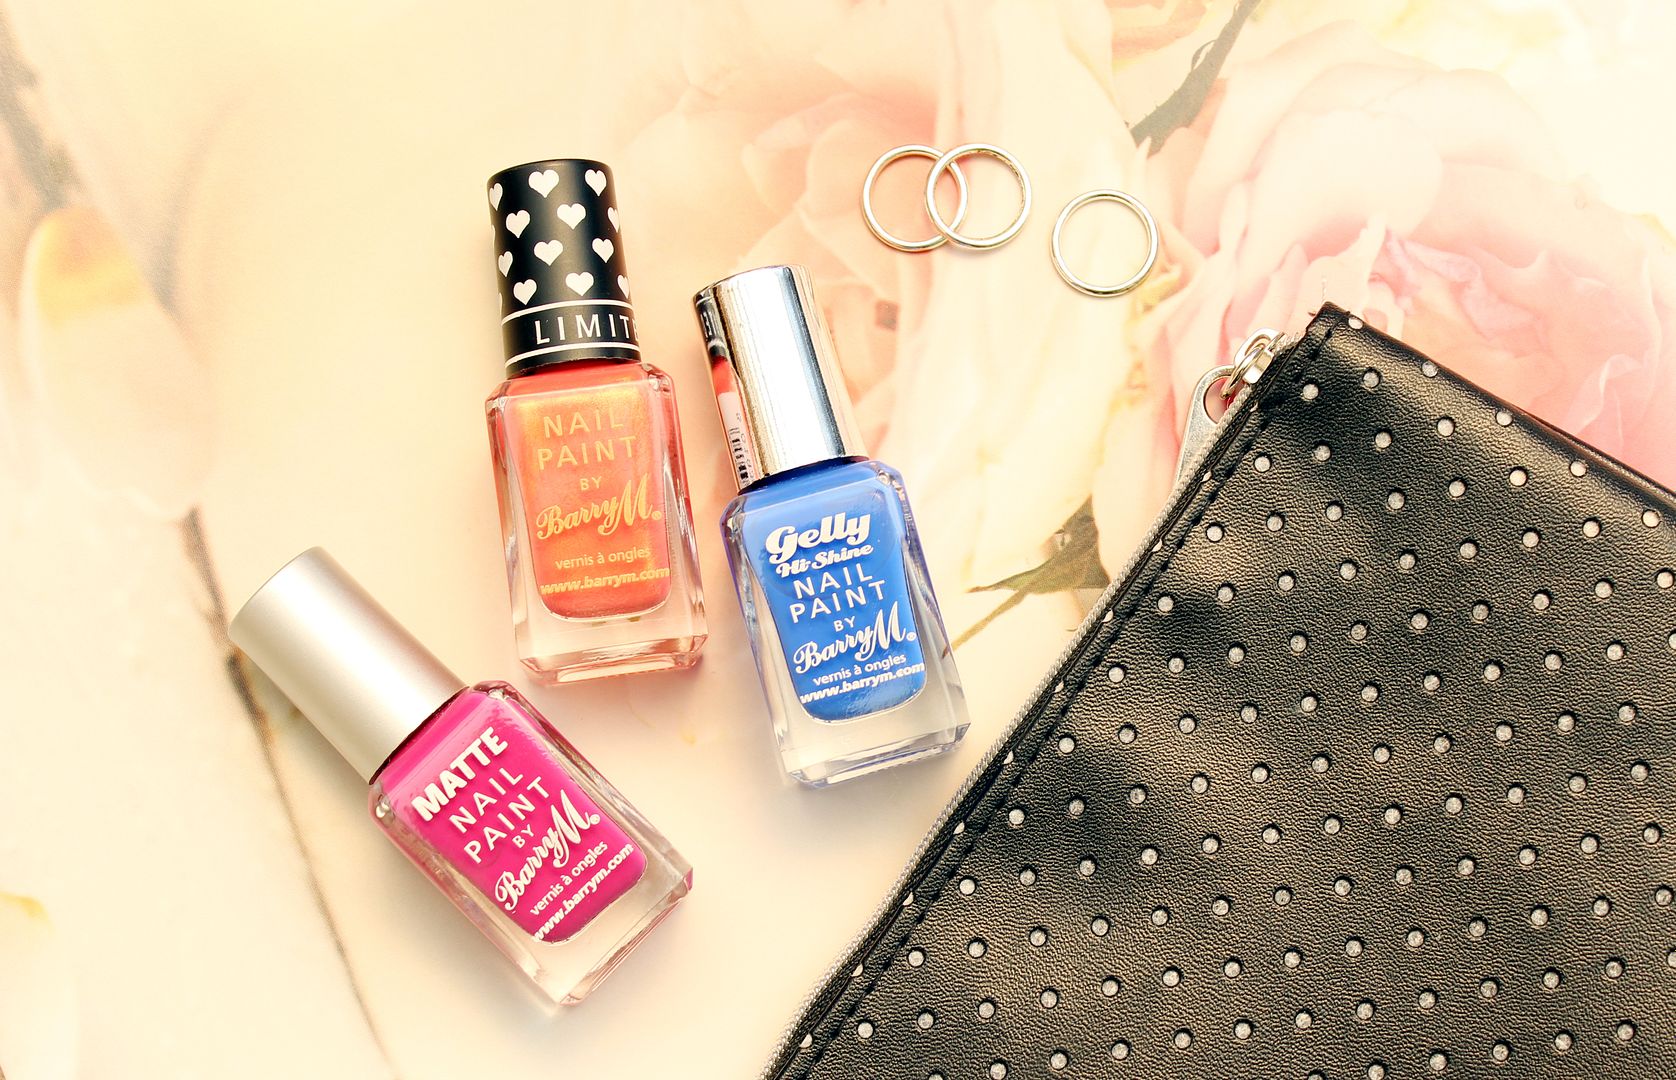 New releases from Barry M